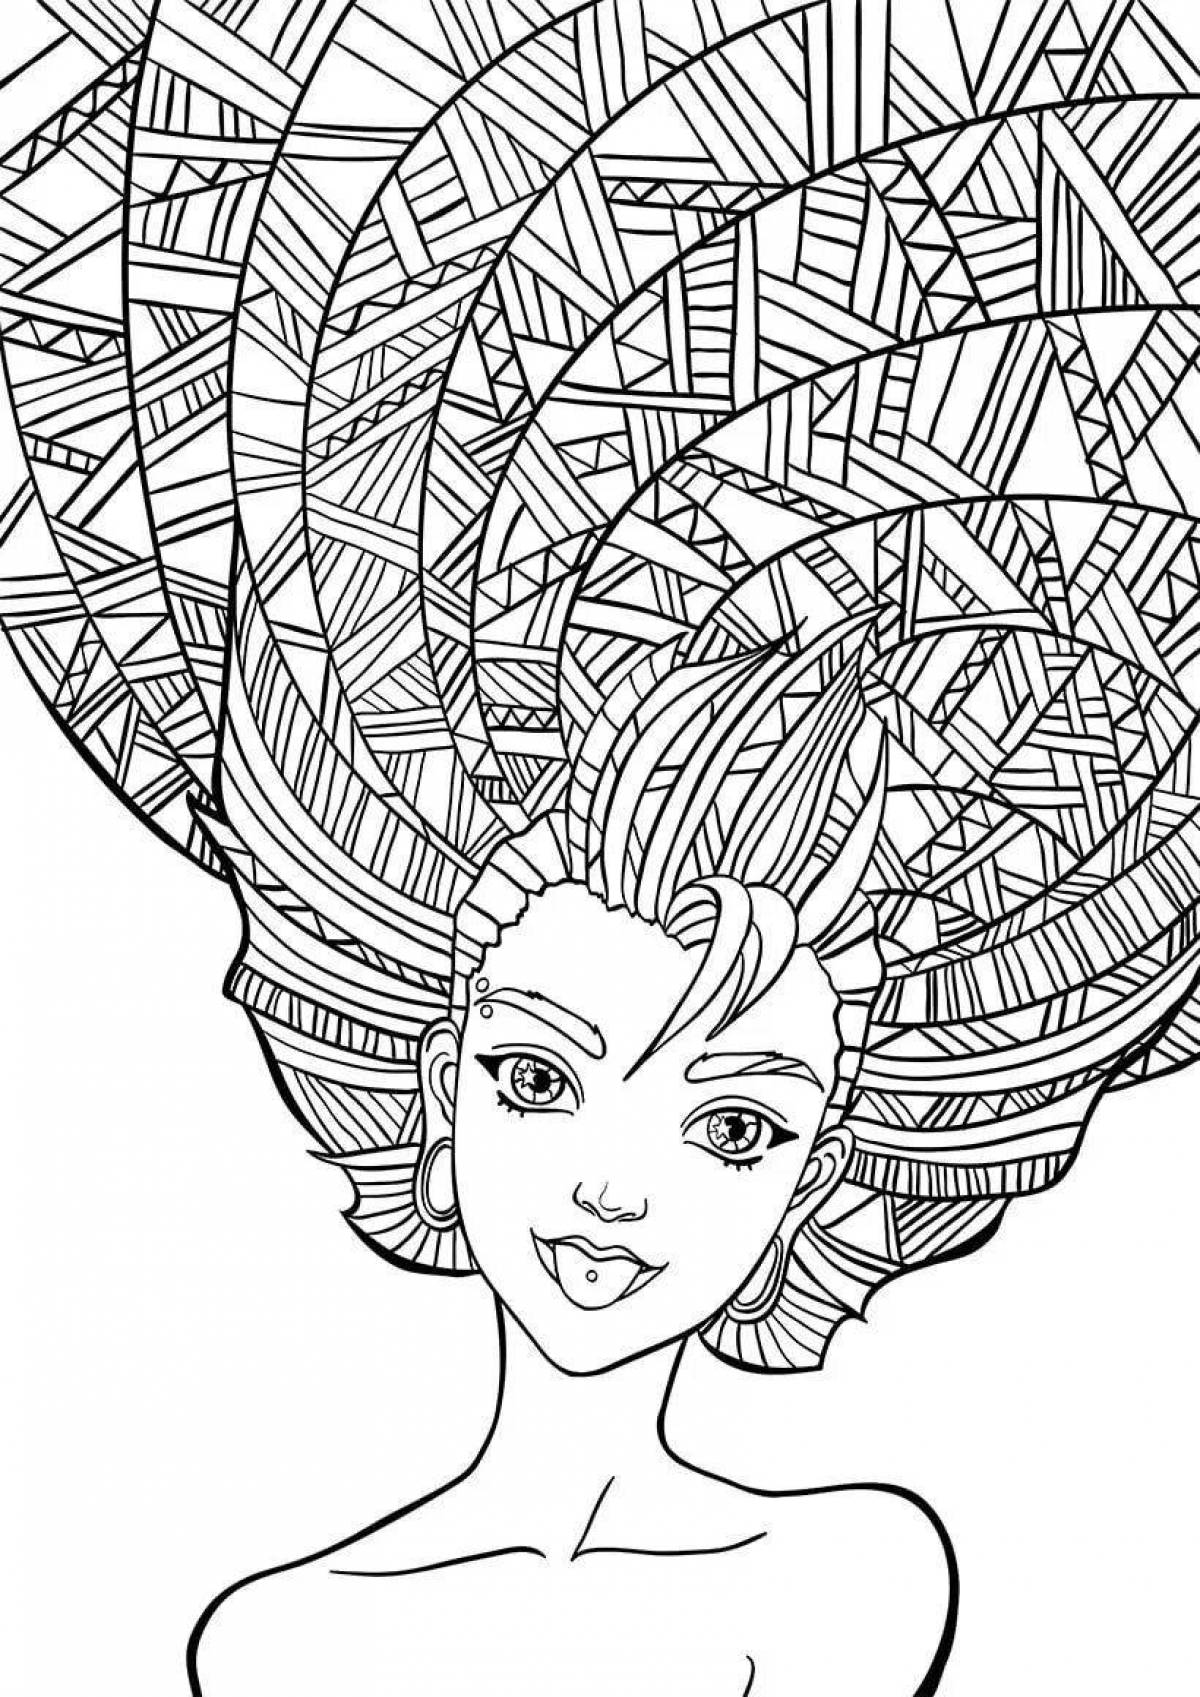 Coloring page charming complex girl